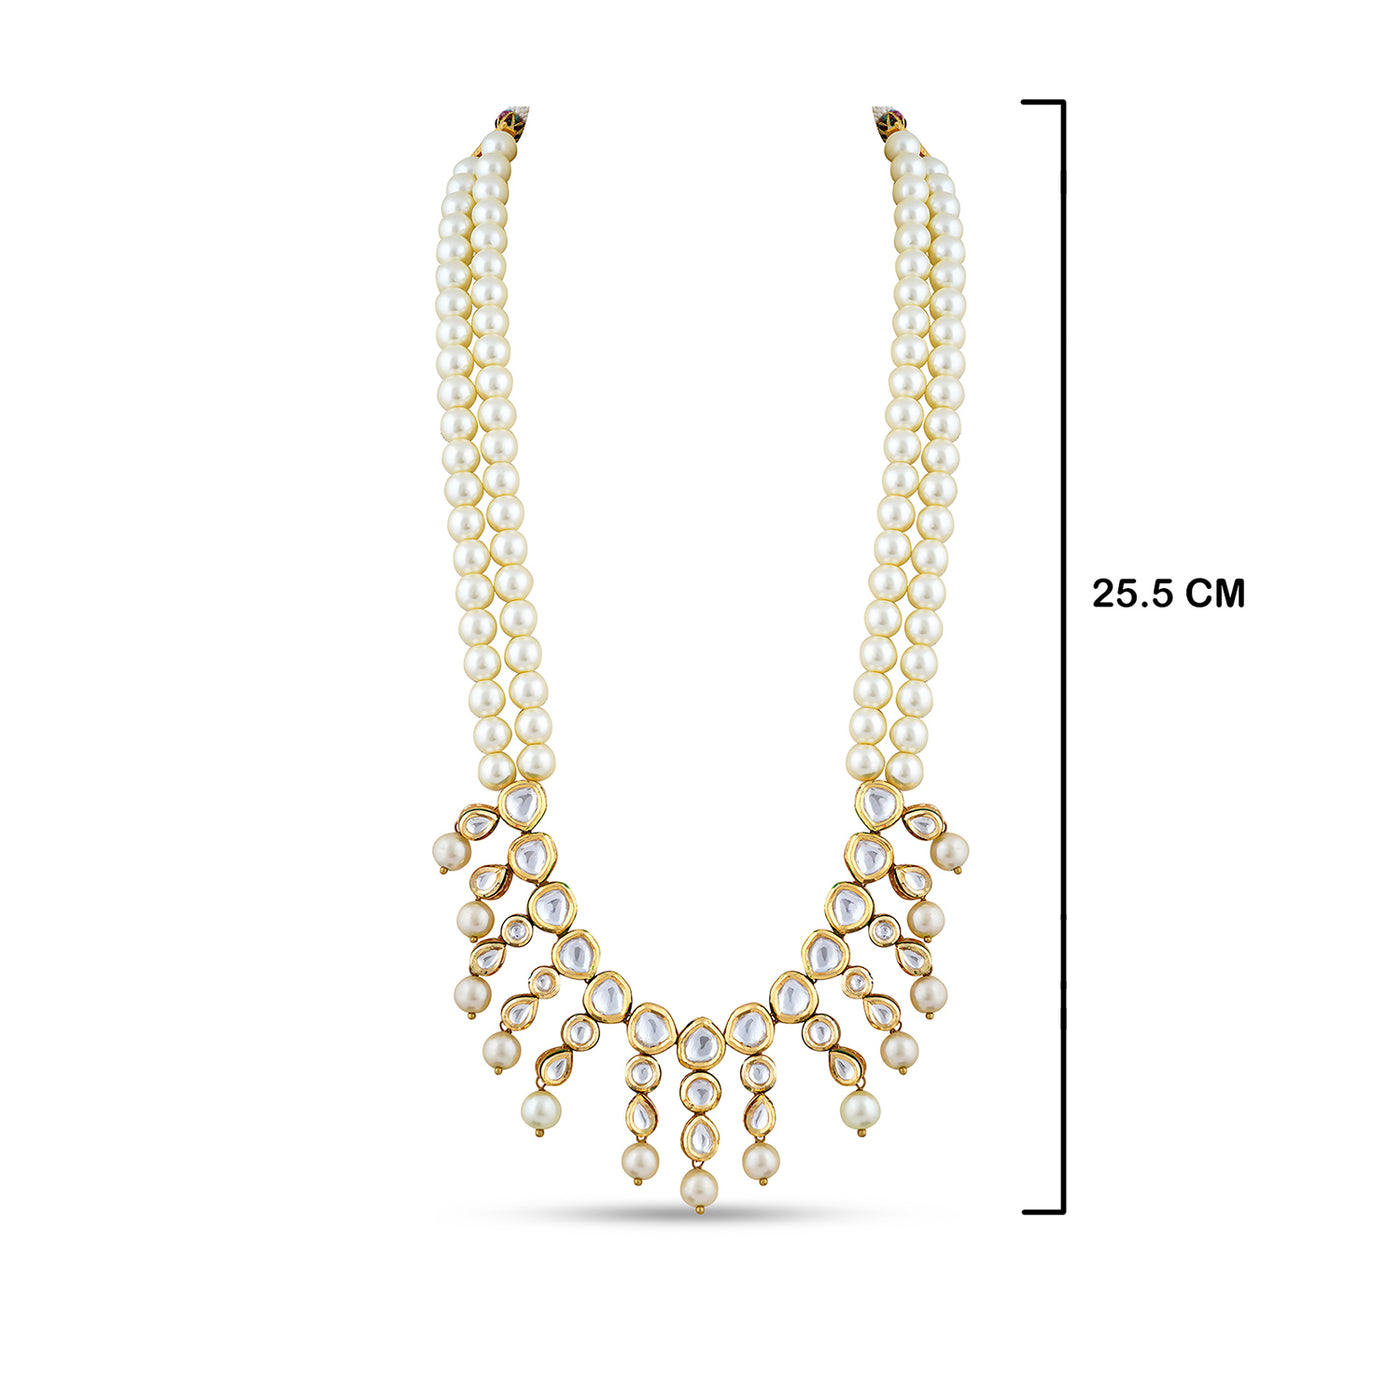 White Pearl Stranded Kundan Necklace with measurements in cm. 25.5cm in length